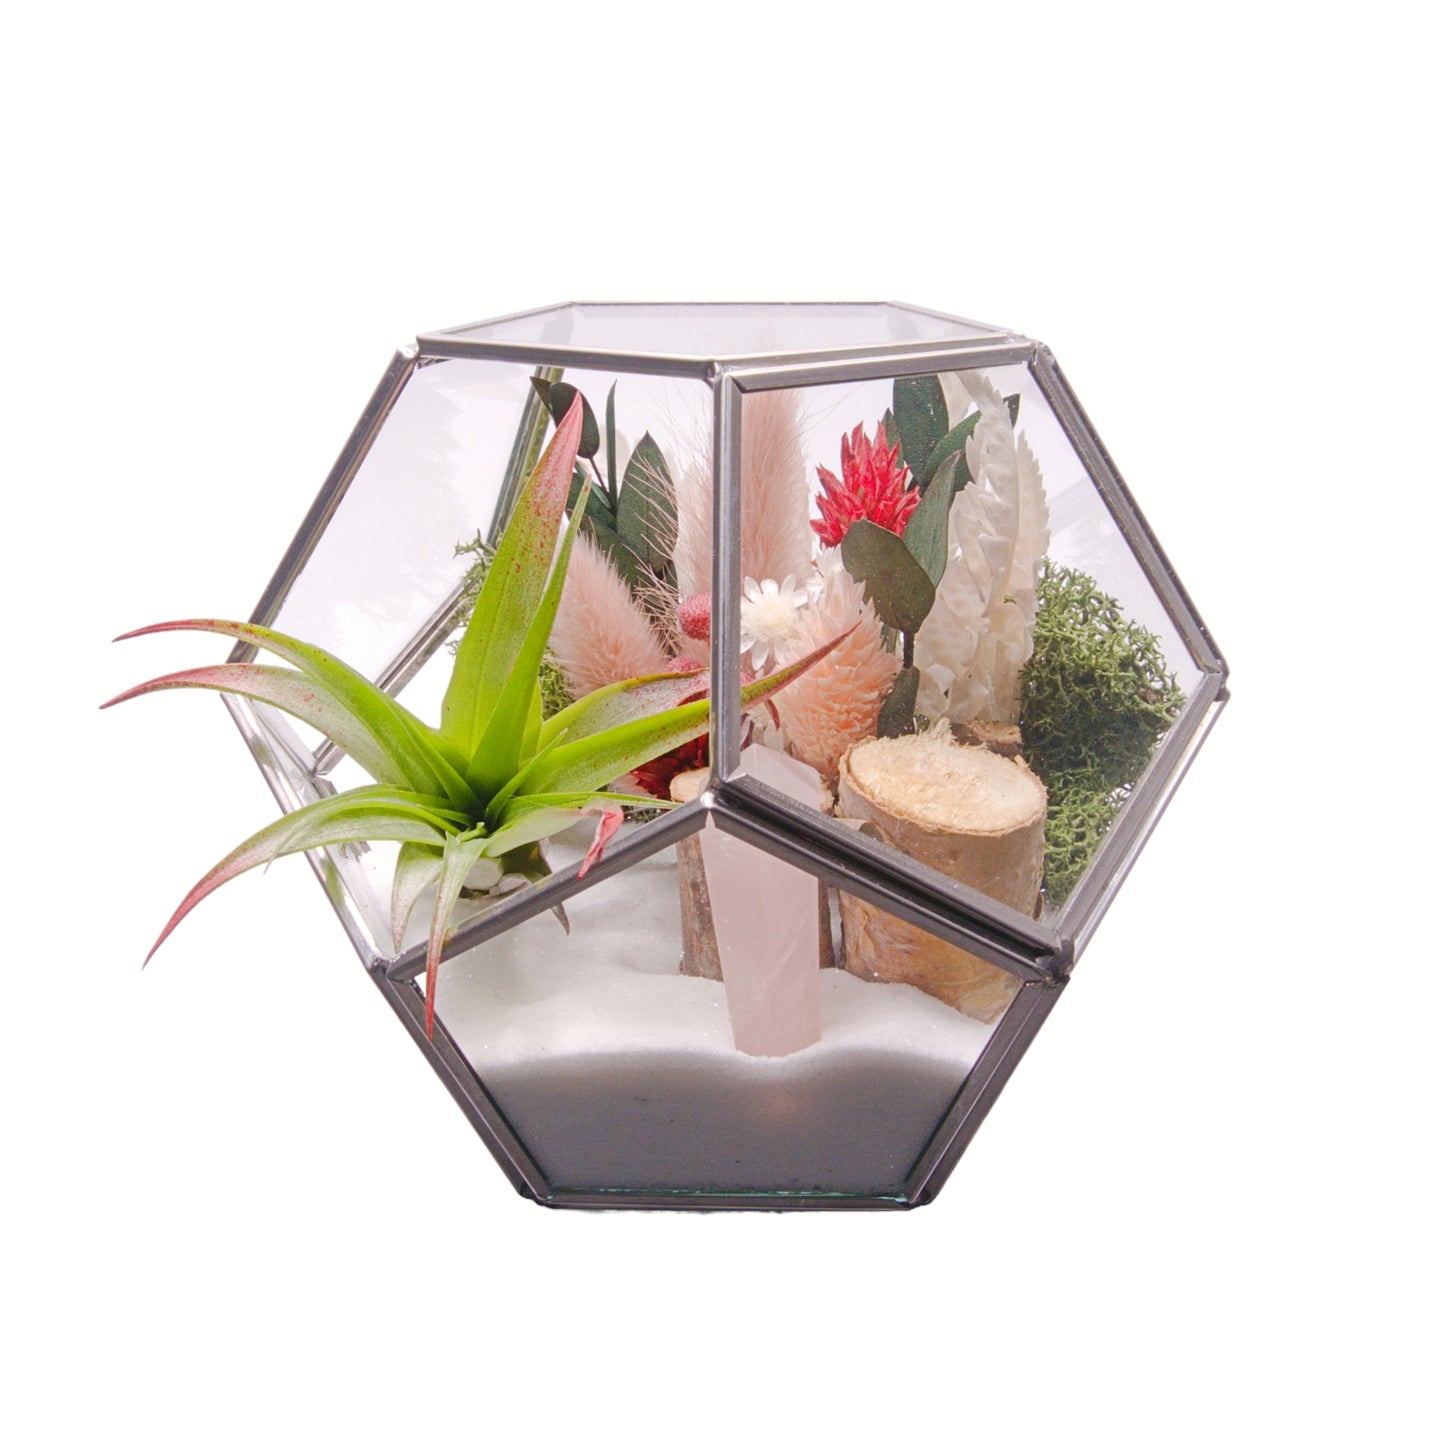 Silver Victorian bowl airplant terrarium with sand, dried flowers, wood, moss and a rose quartz crystal point